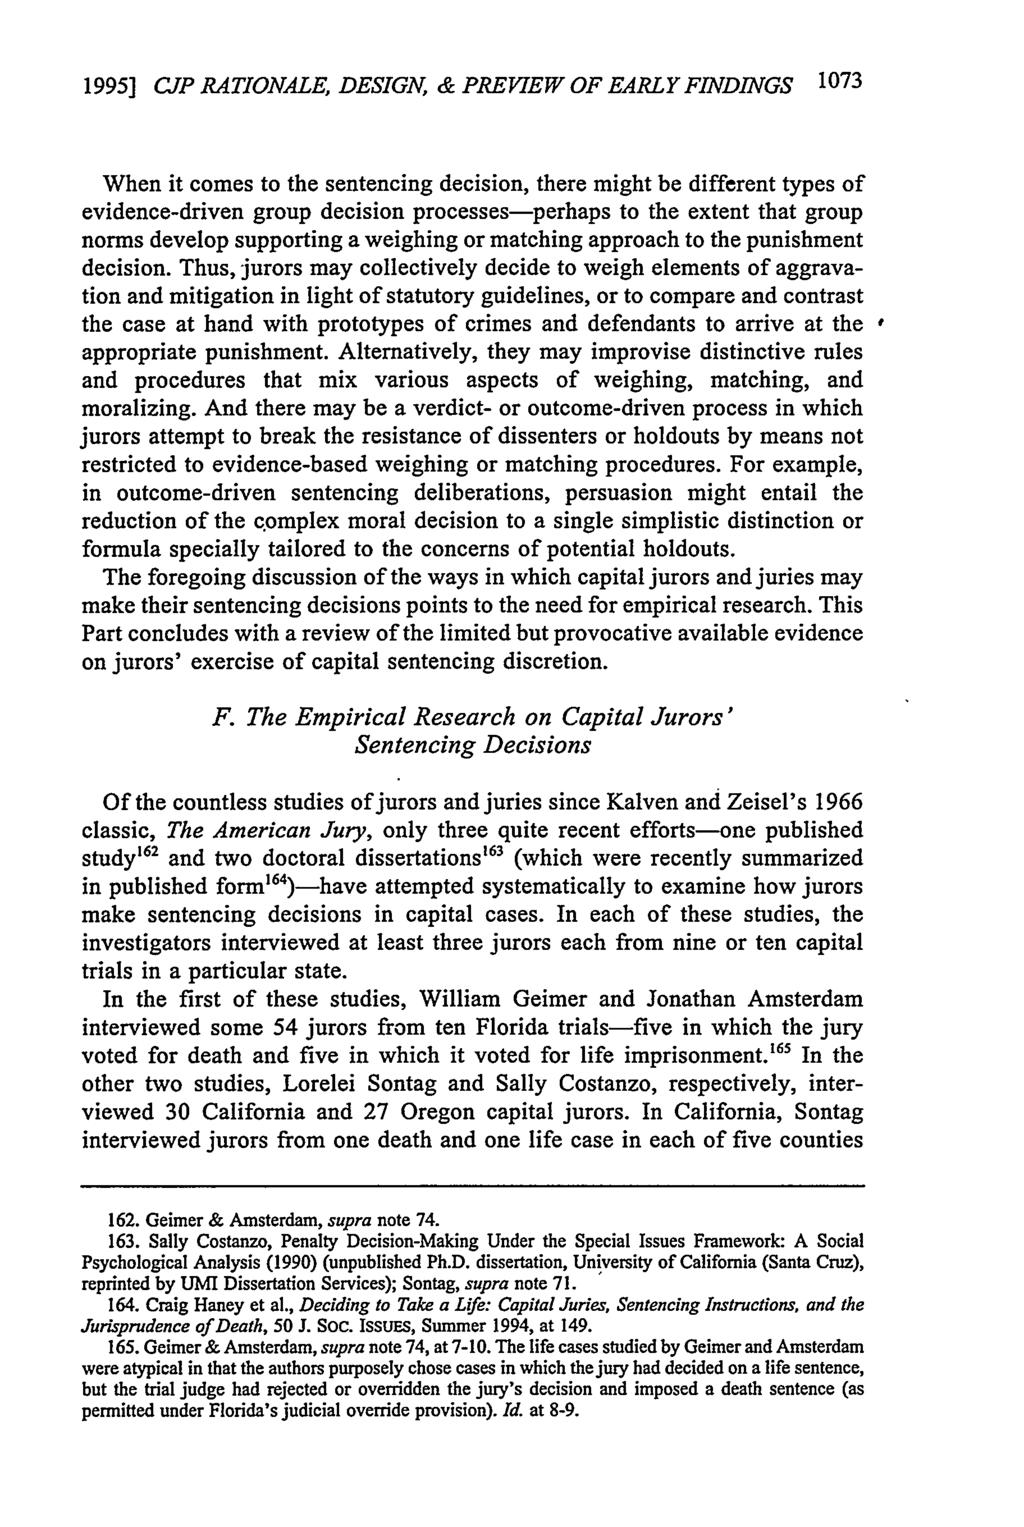 1995] CJP RATIONALE, DESIGN, & PREVIEW OF EARLY FINDINGS 1073 When it comes to the sentencing decision, there might be different types of evidence-driven group decision processes-perhaps to the